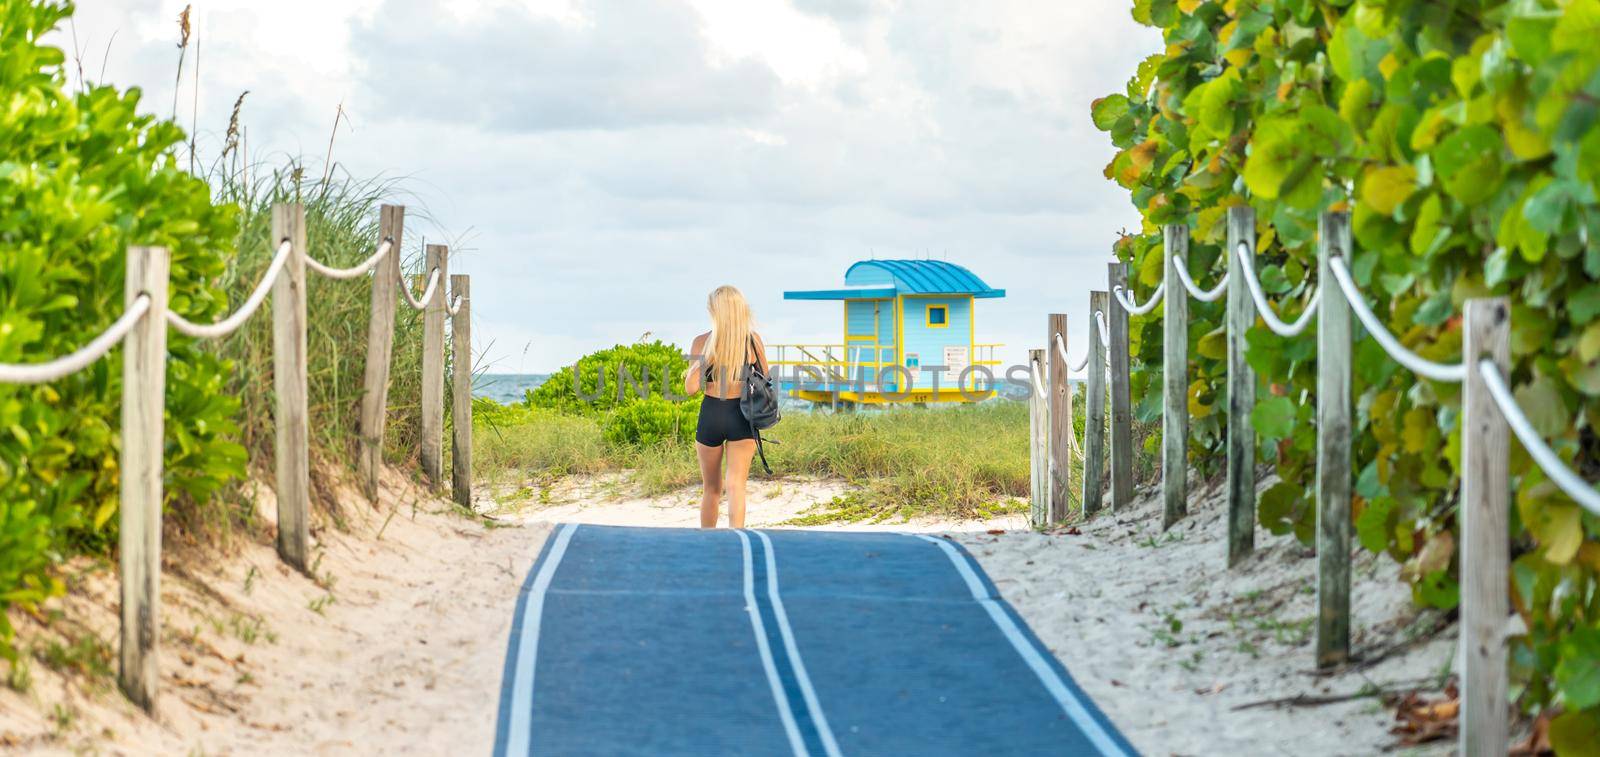 Woman walking to the beach on Footpath. South Beach in Miami, Florida, USA